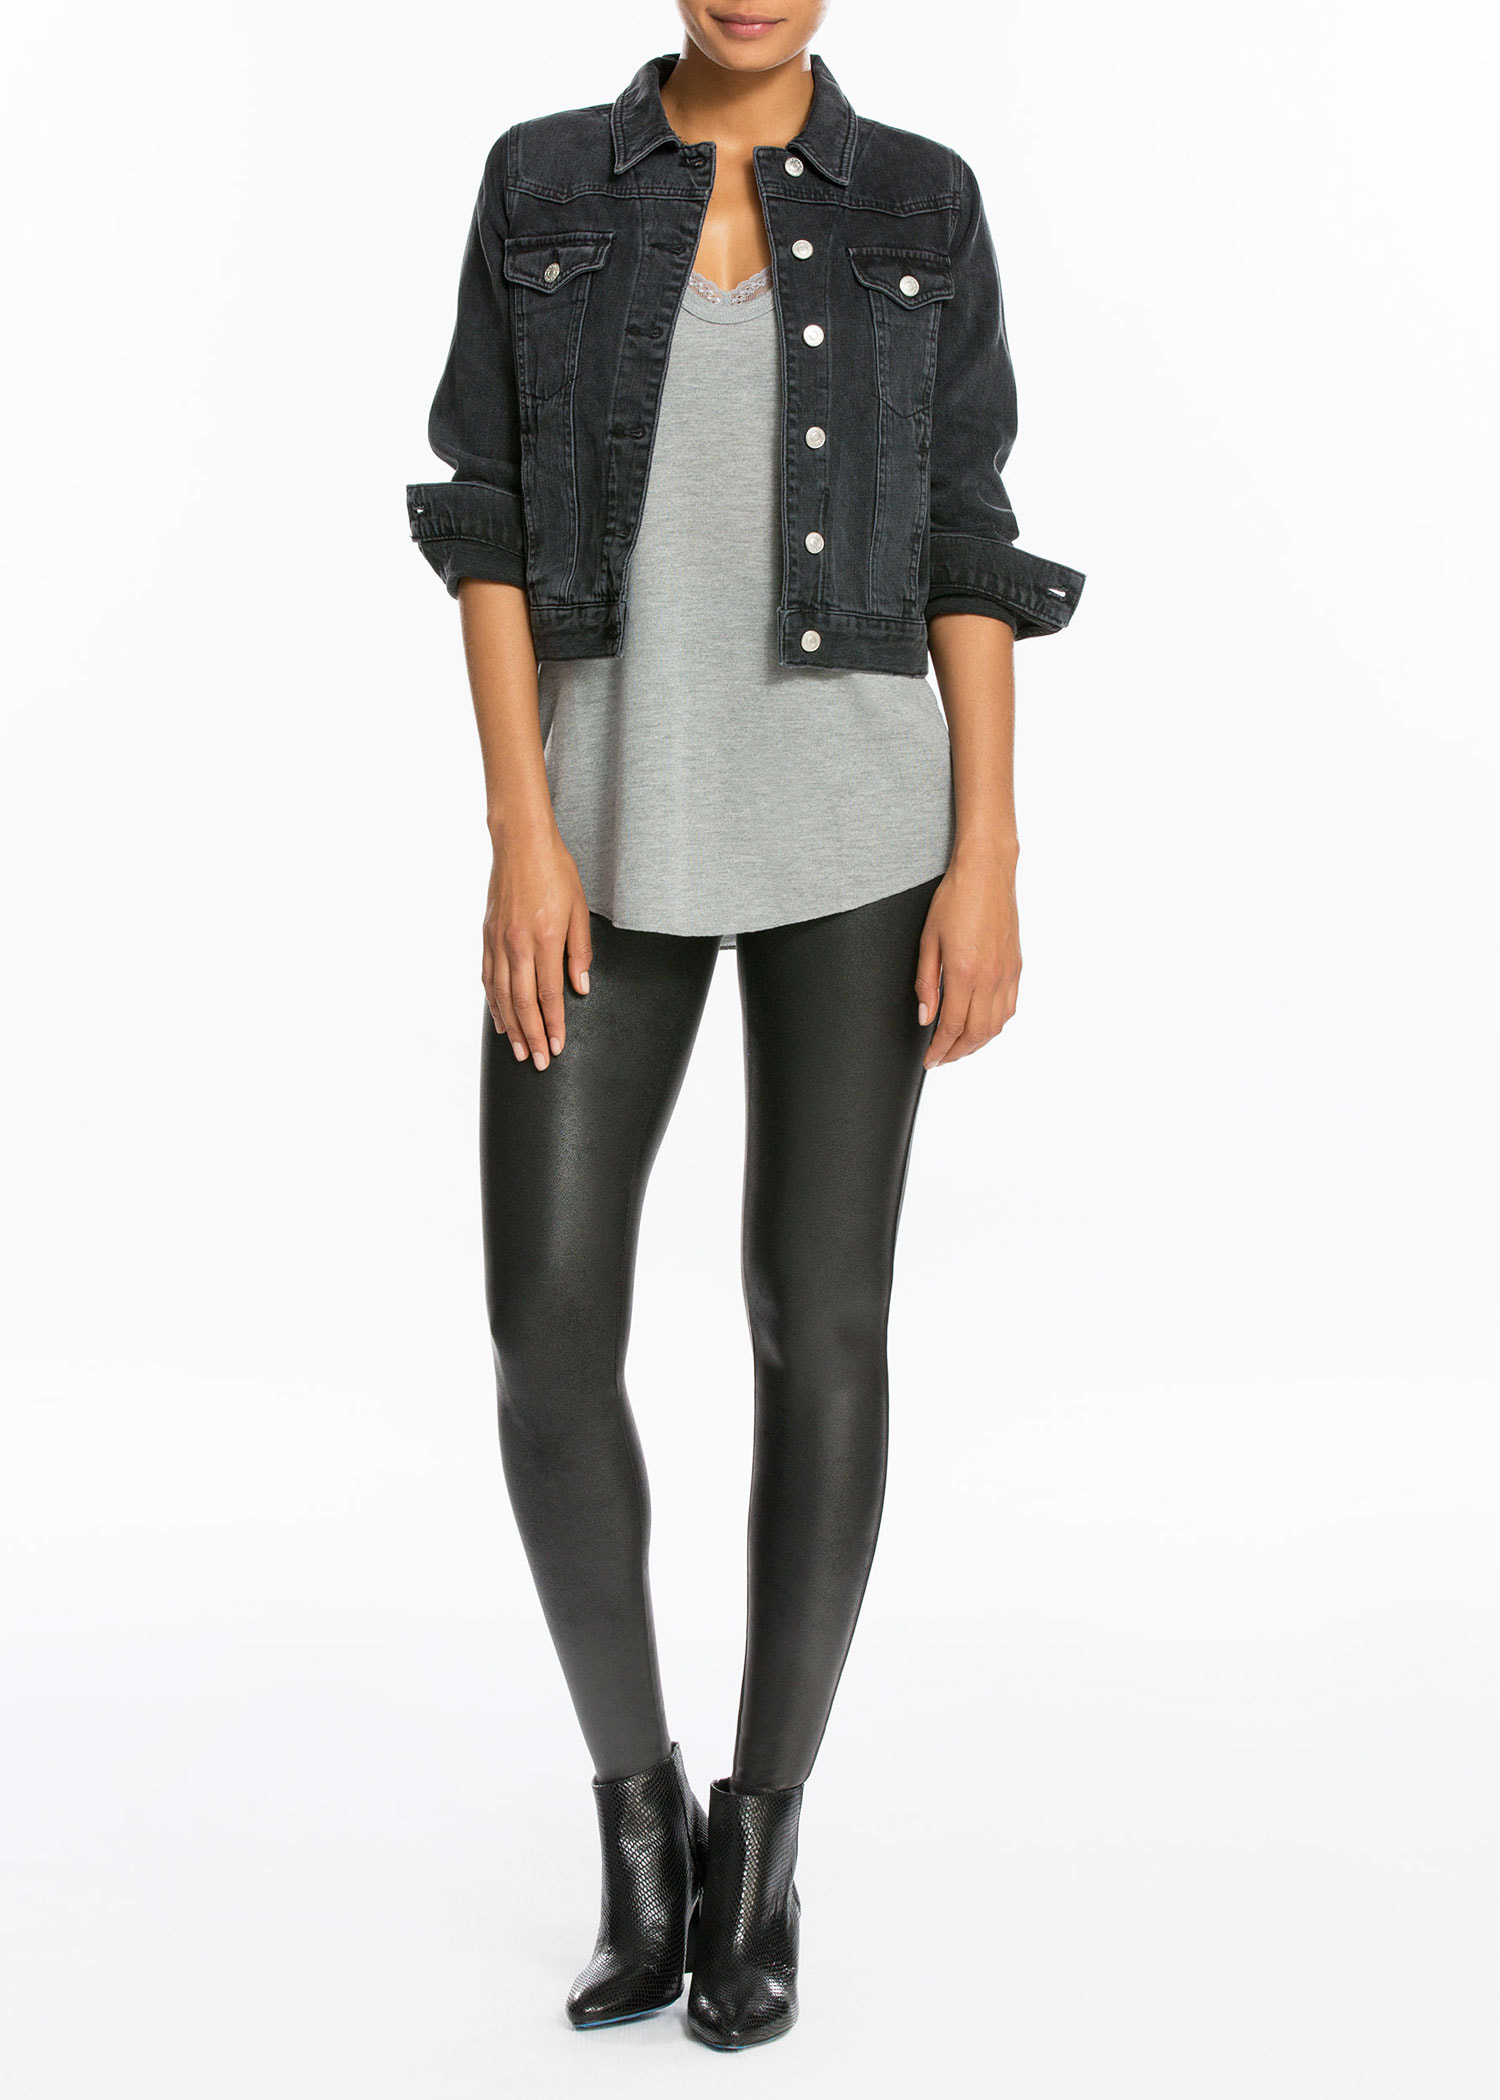 Faux Leather Leggings, Black  SPANX® – North & Main Clothing Company